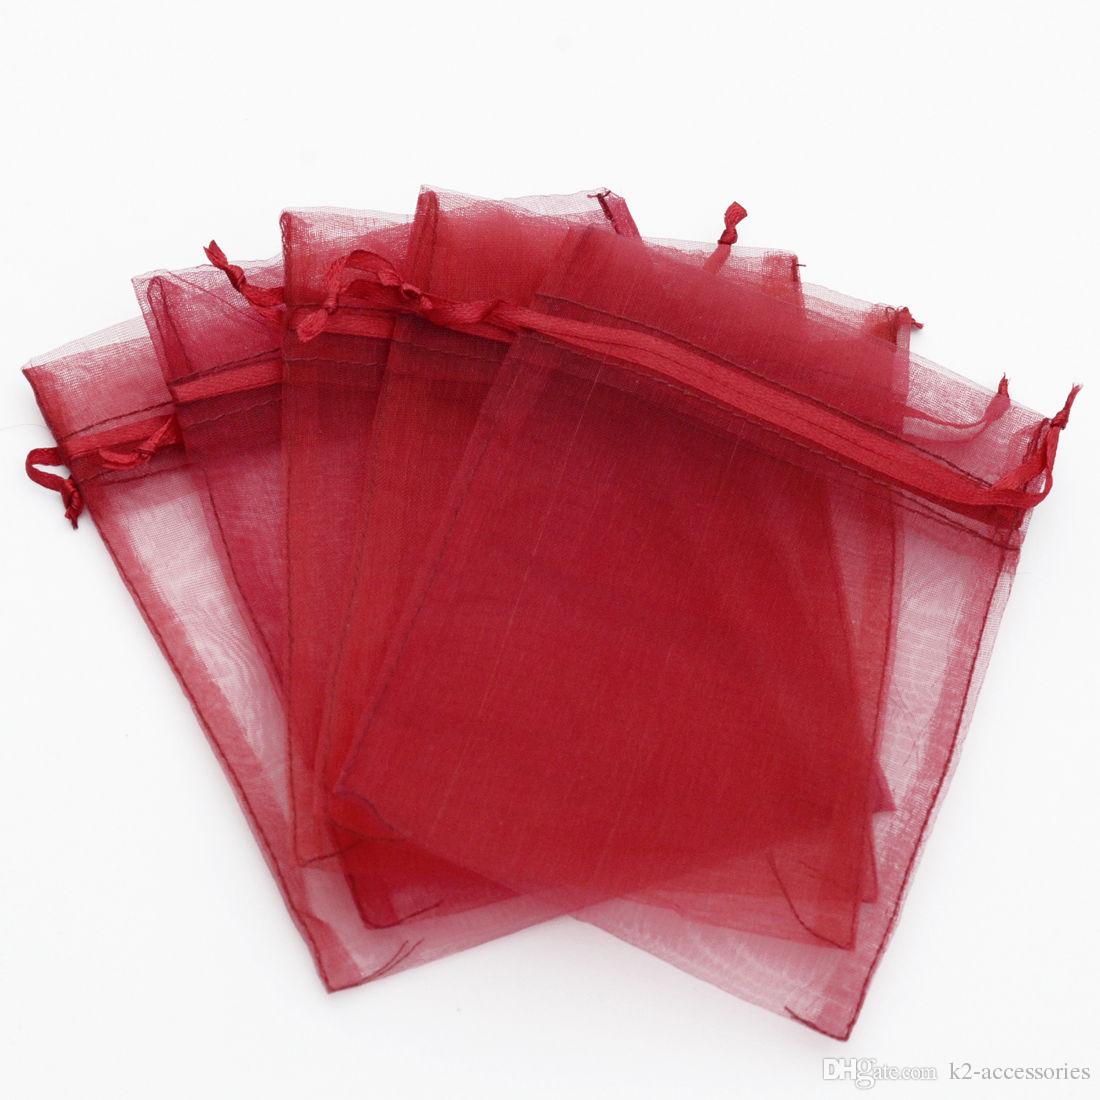 

100pcs DARK RED Drawstring Organza JEWELRY Gift packing Bags 7x9cm 9x12cm 10x15cm Wedding Party Christmas Favor Gift Bags